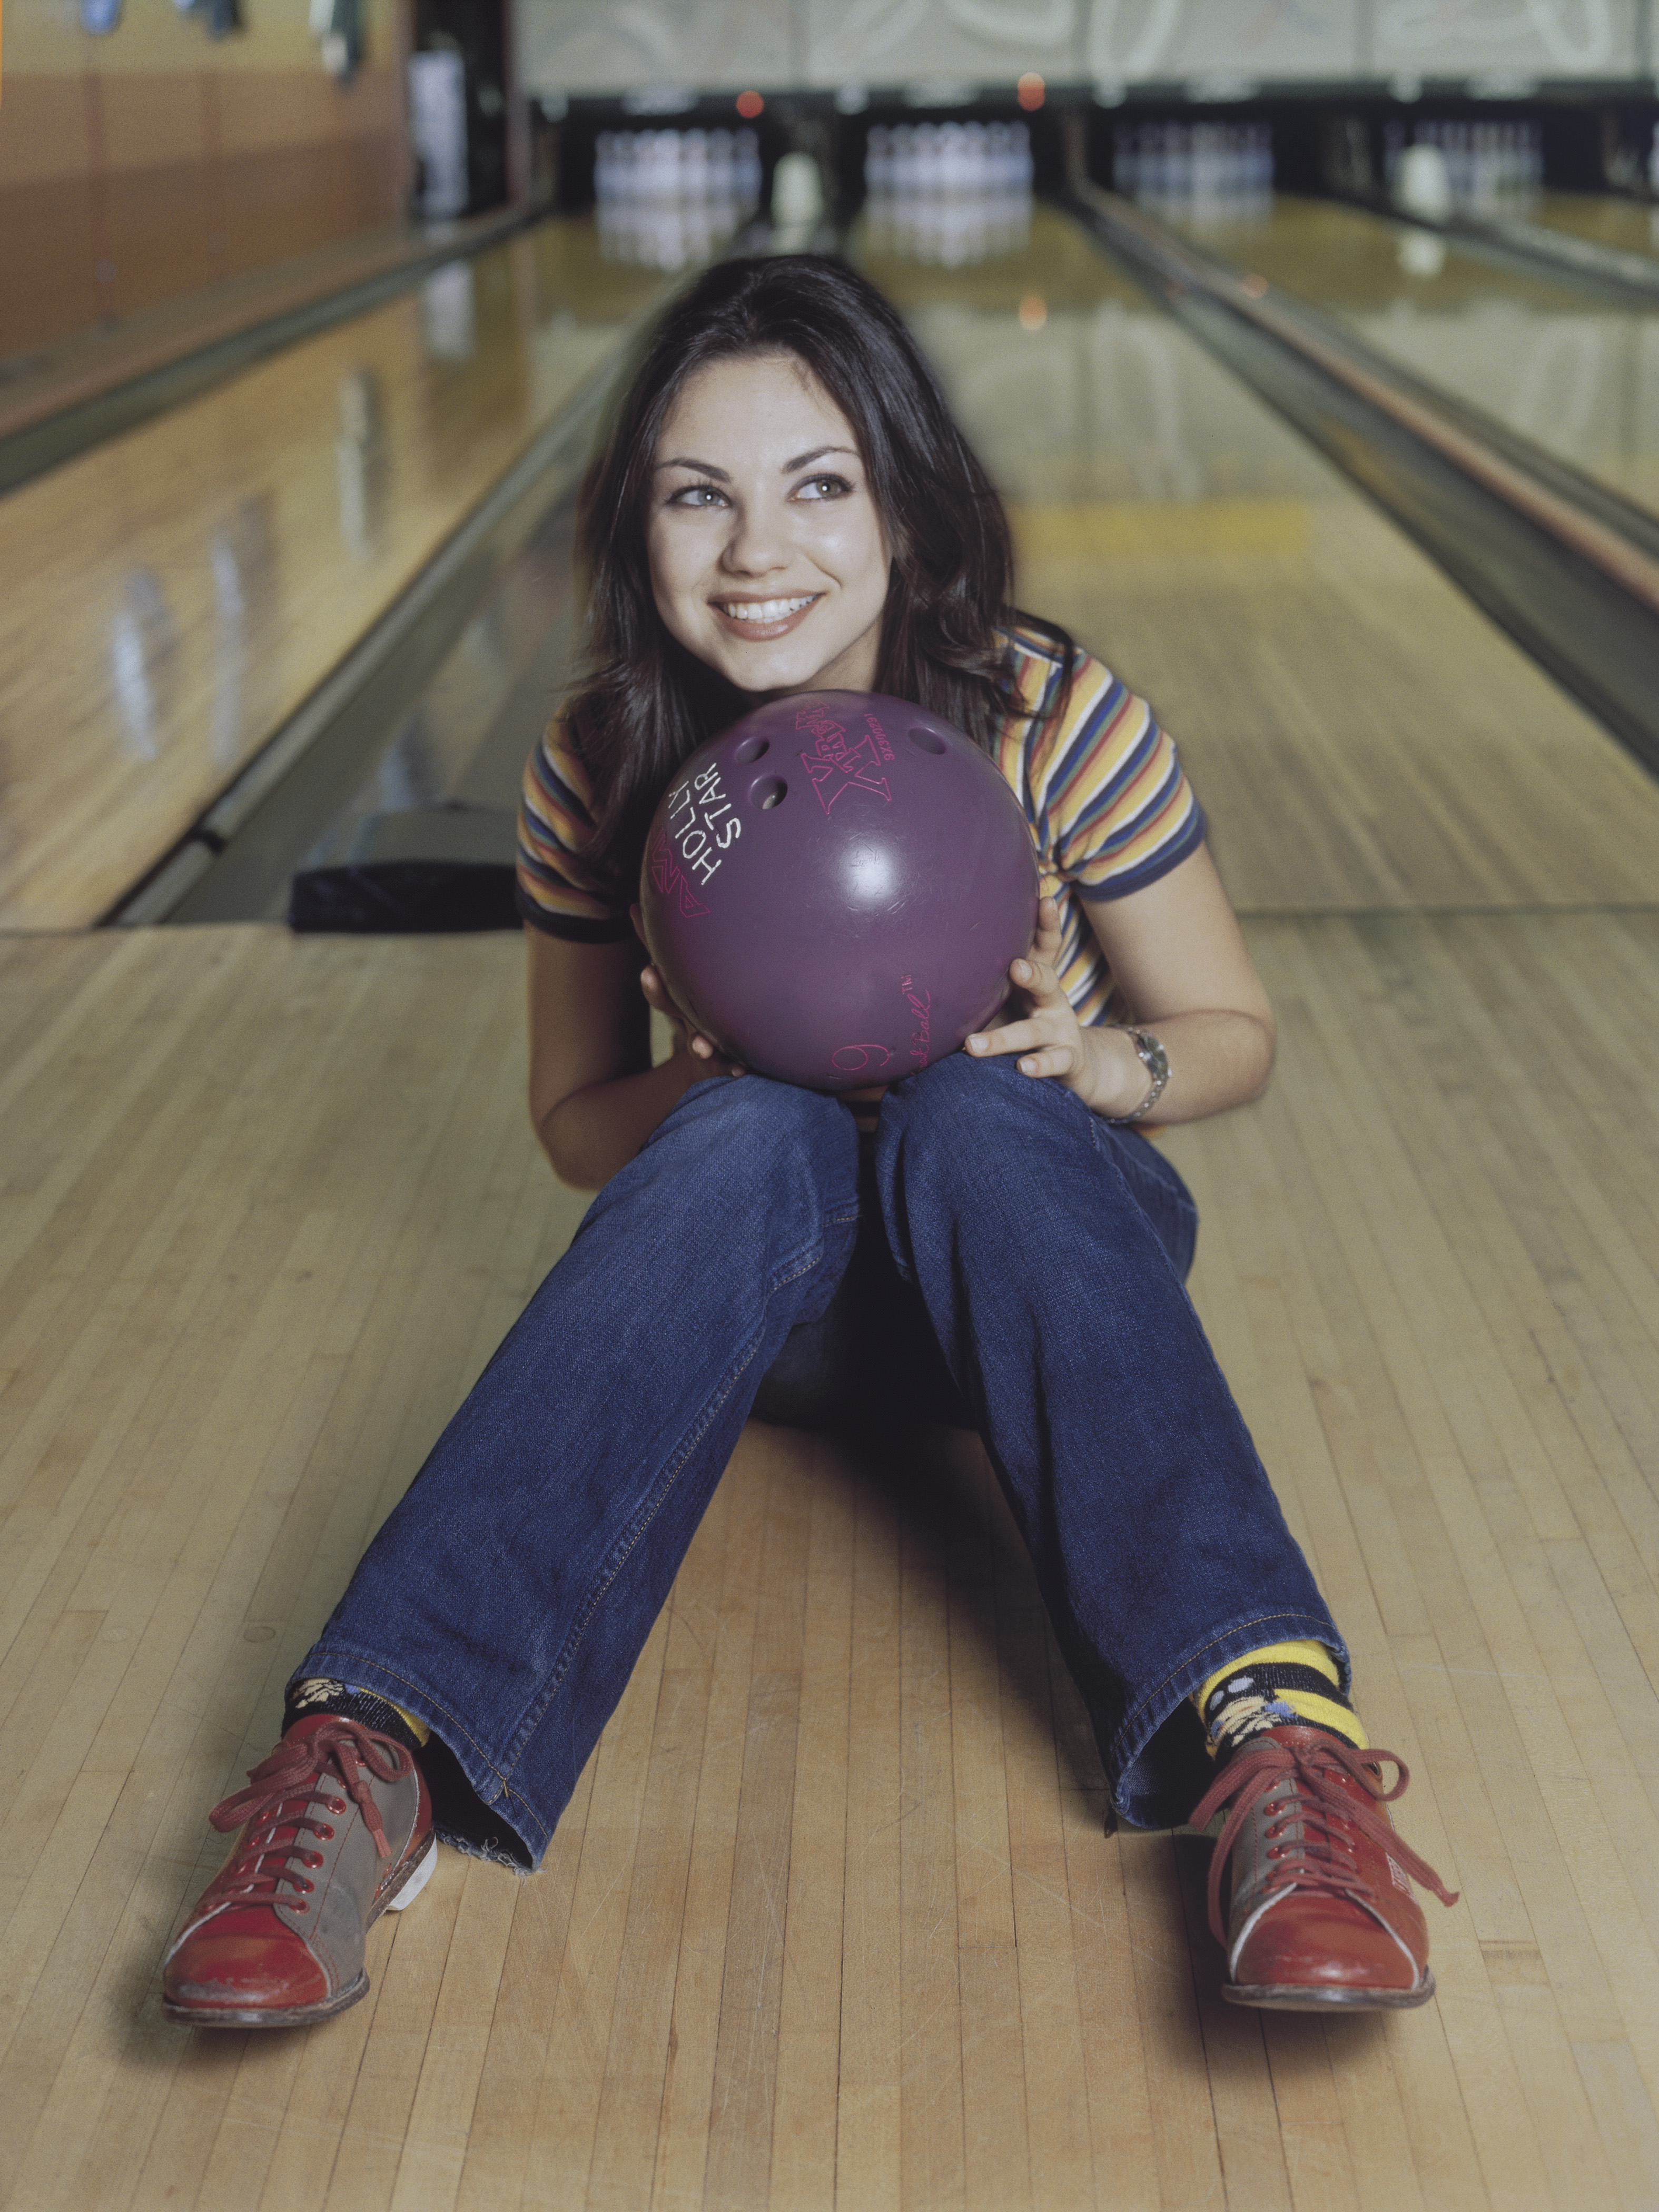 Actress Mila Kunis poses for a portrait at a bowling alley in 2006 in Hollywood, California. | Source: Getty Images